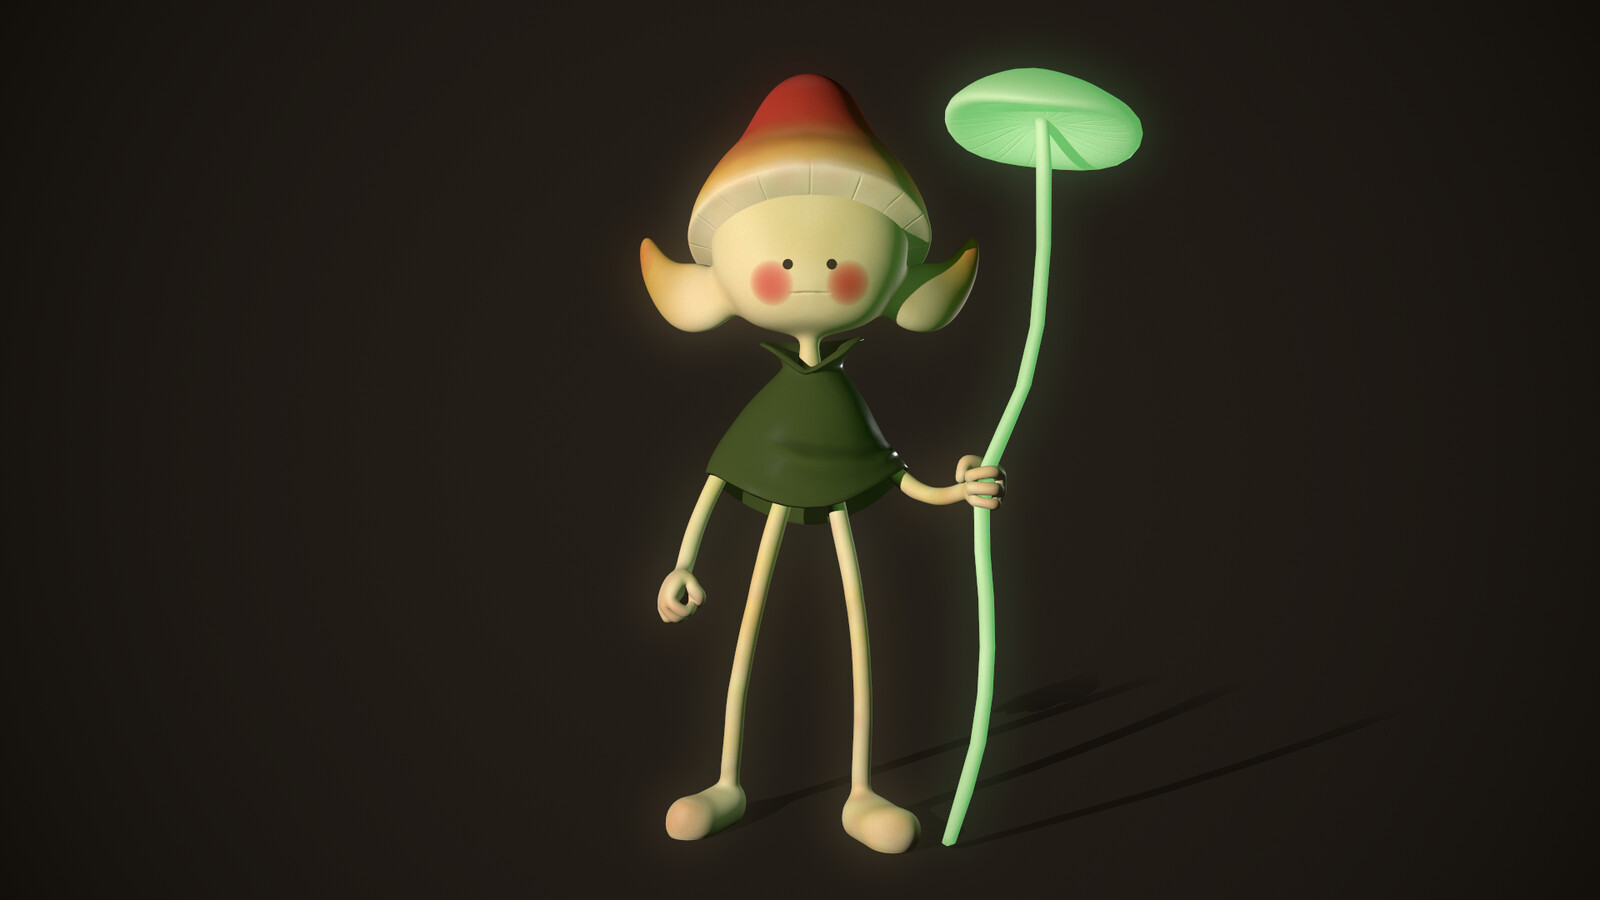 For this guy I used the Witch's hat mushroom based on his shape for how I textured him.